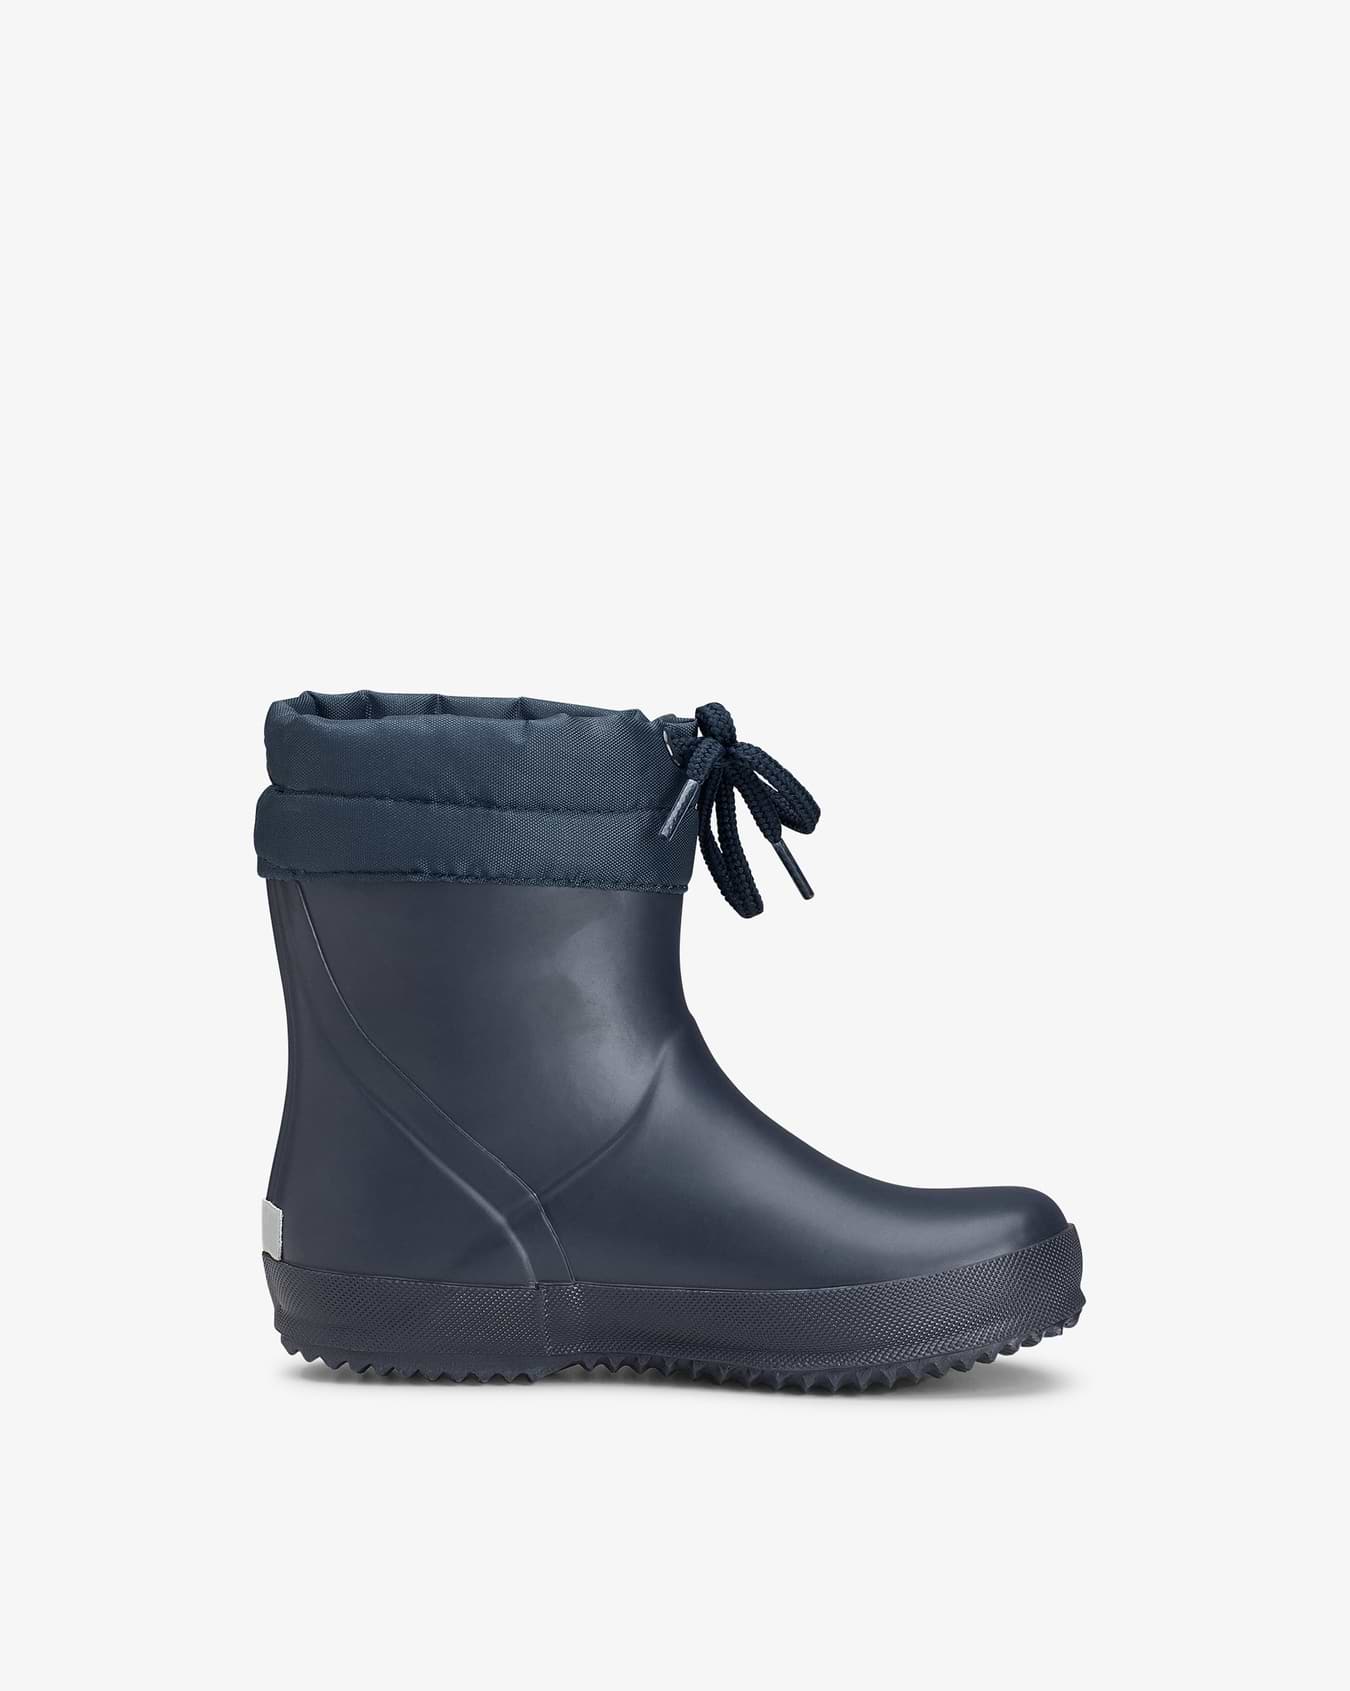 Viking Alv Indie Kids Rubber Boots